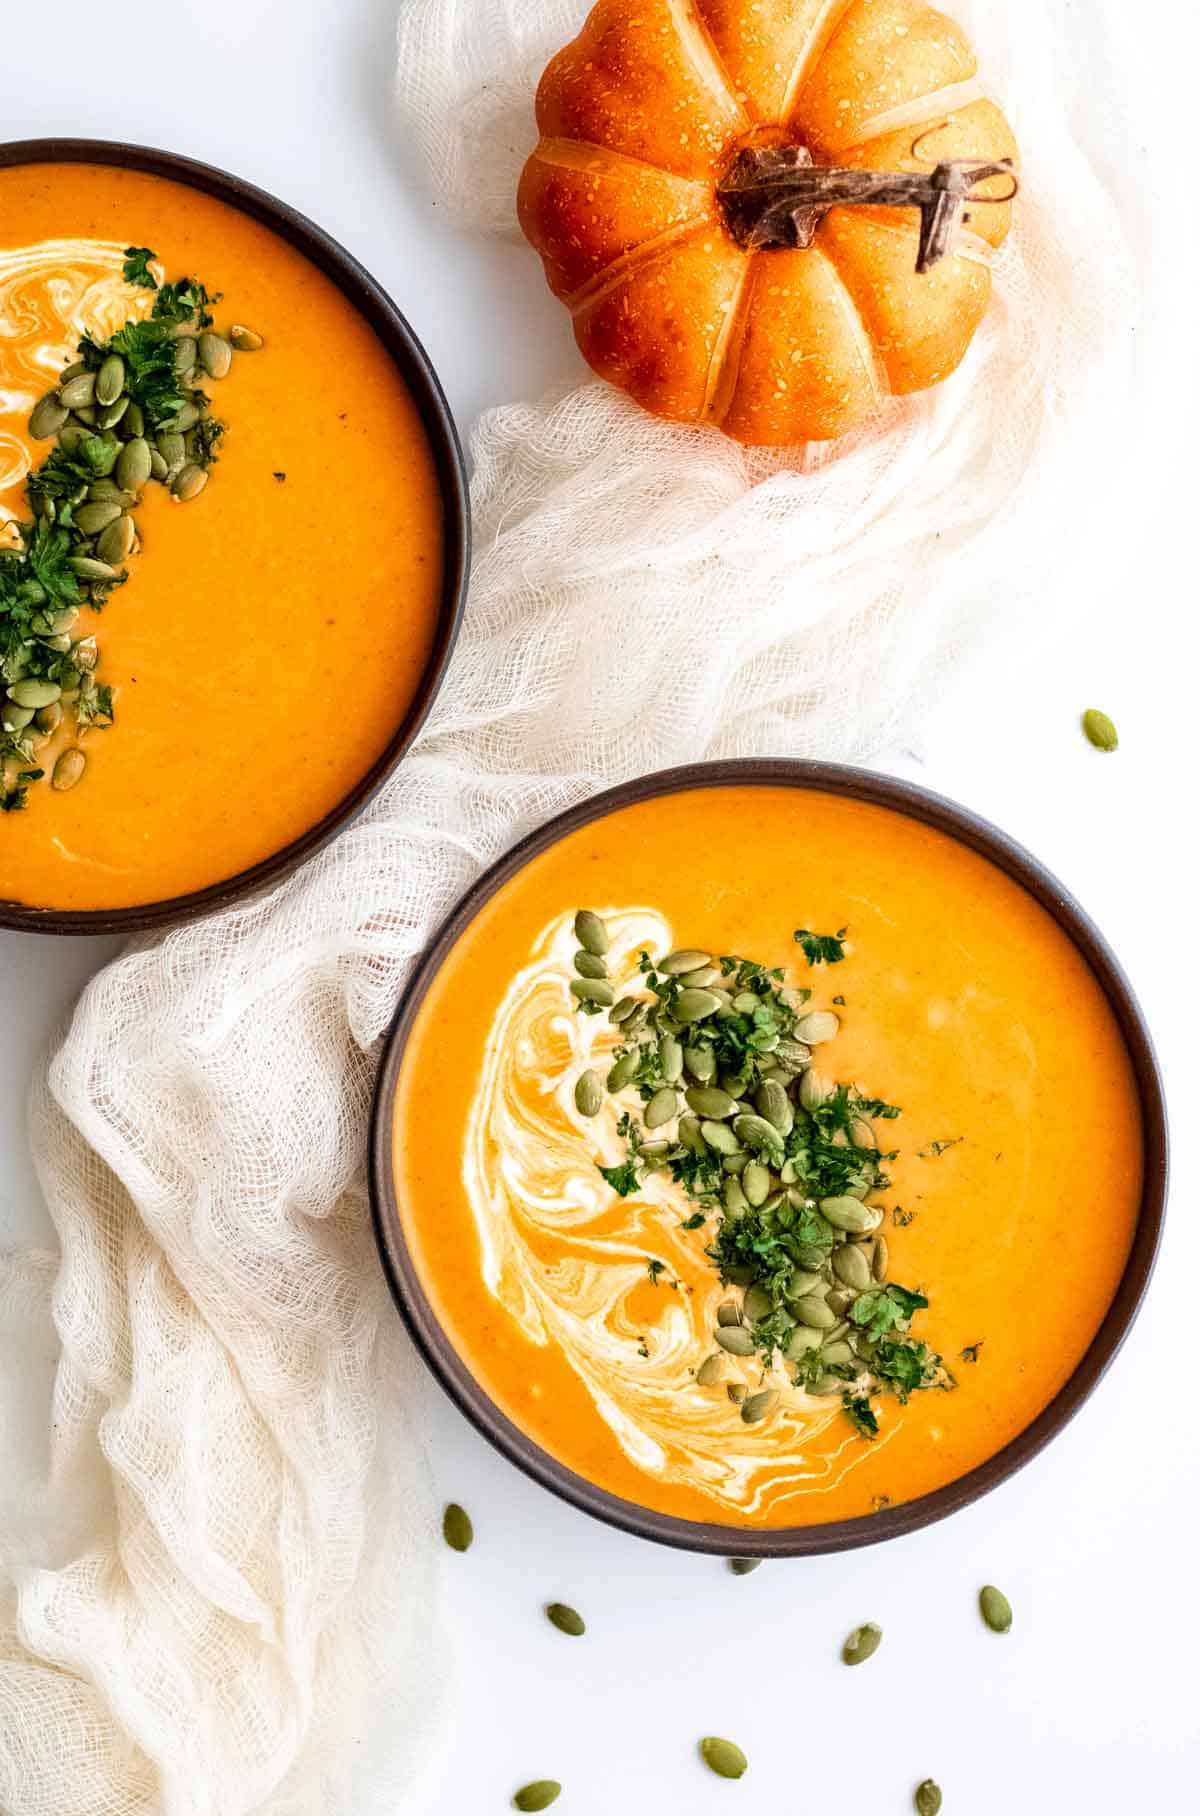 Two bowls of pumpkin soup on a white cloth.